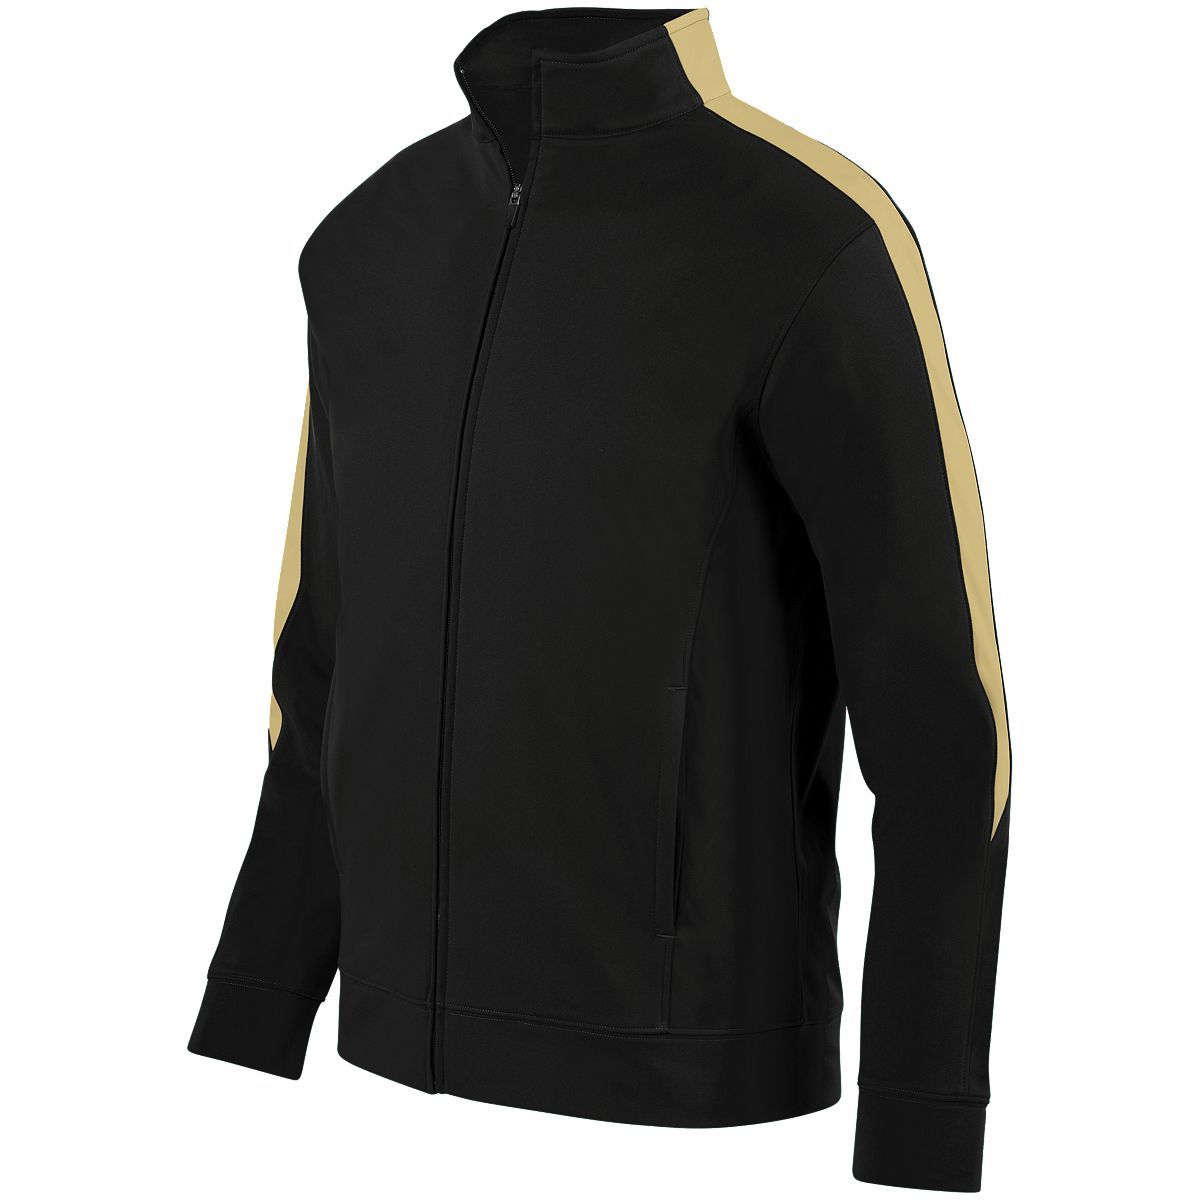 Augusta Sportswear Medalist Jacket 2.0 in Black/Vegas Gold  -Part of the Adult, Adult-Jacket, Augusta-Products, Outerwear product lines at KanaleyCreations.com